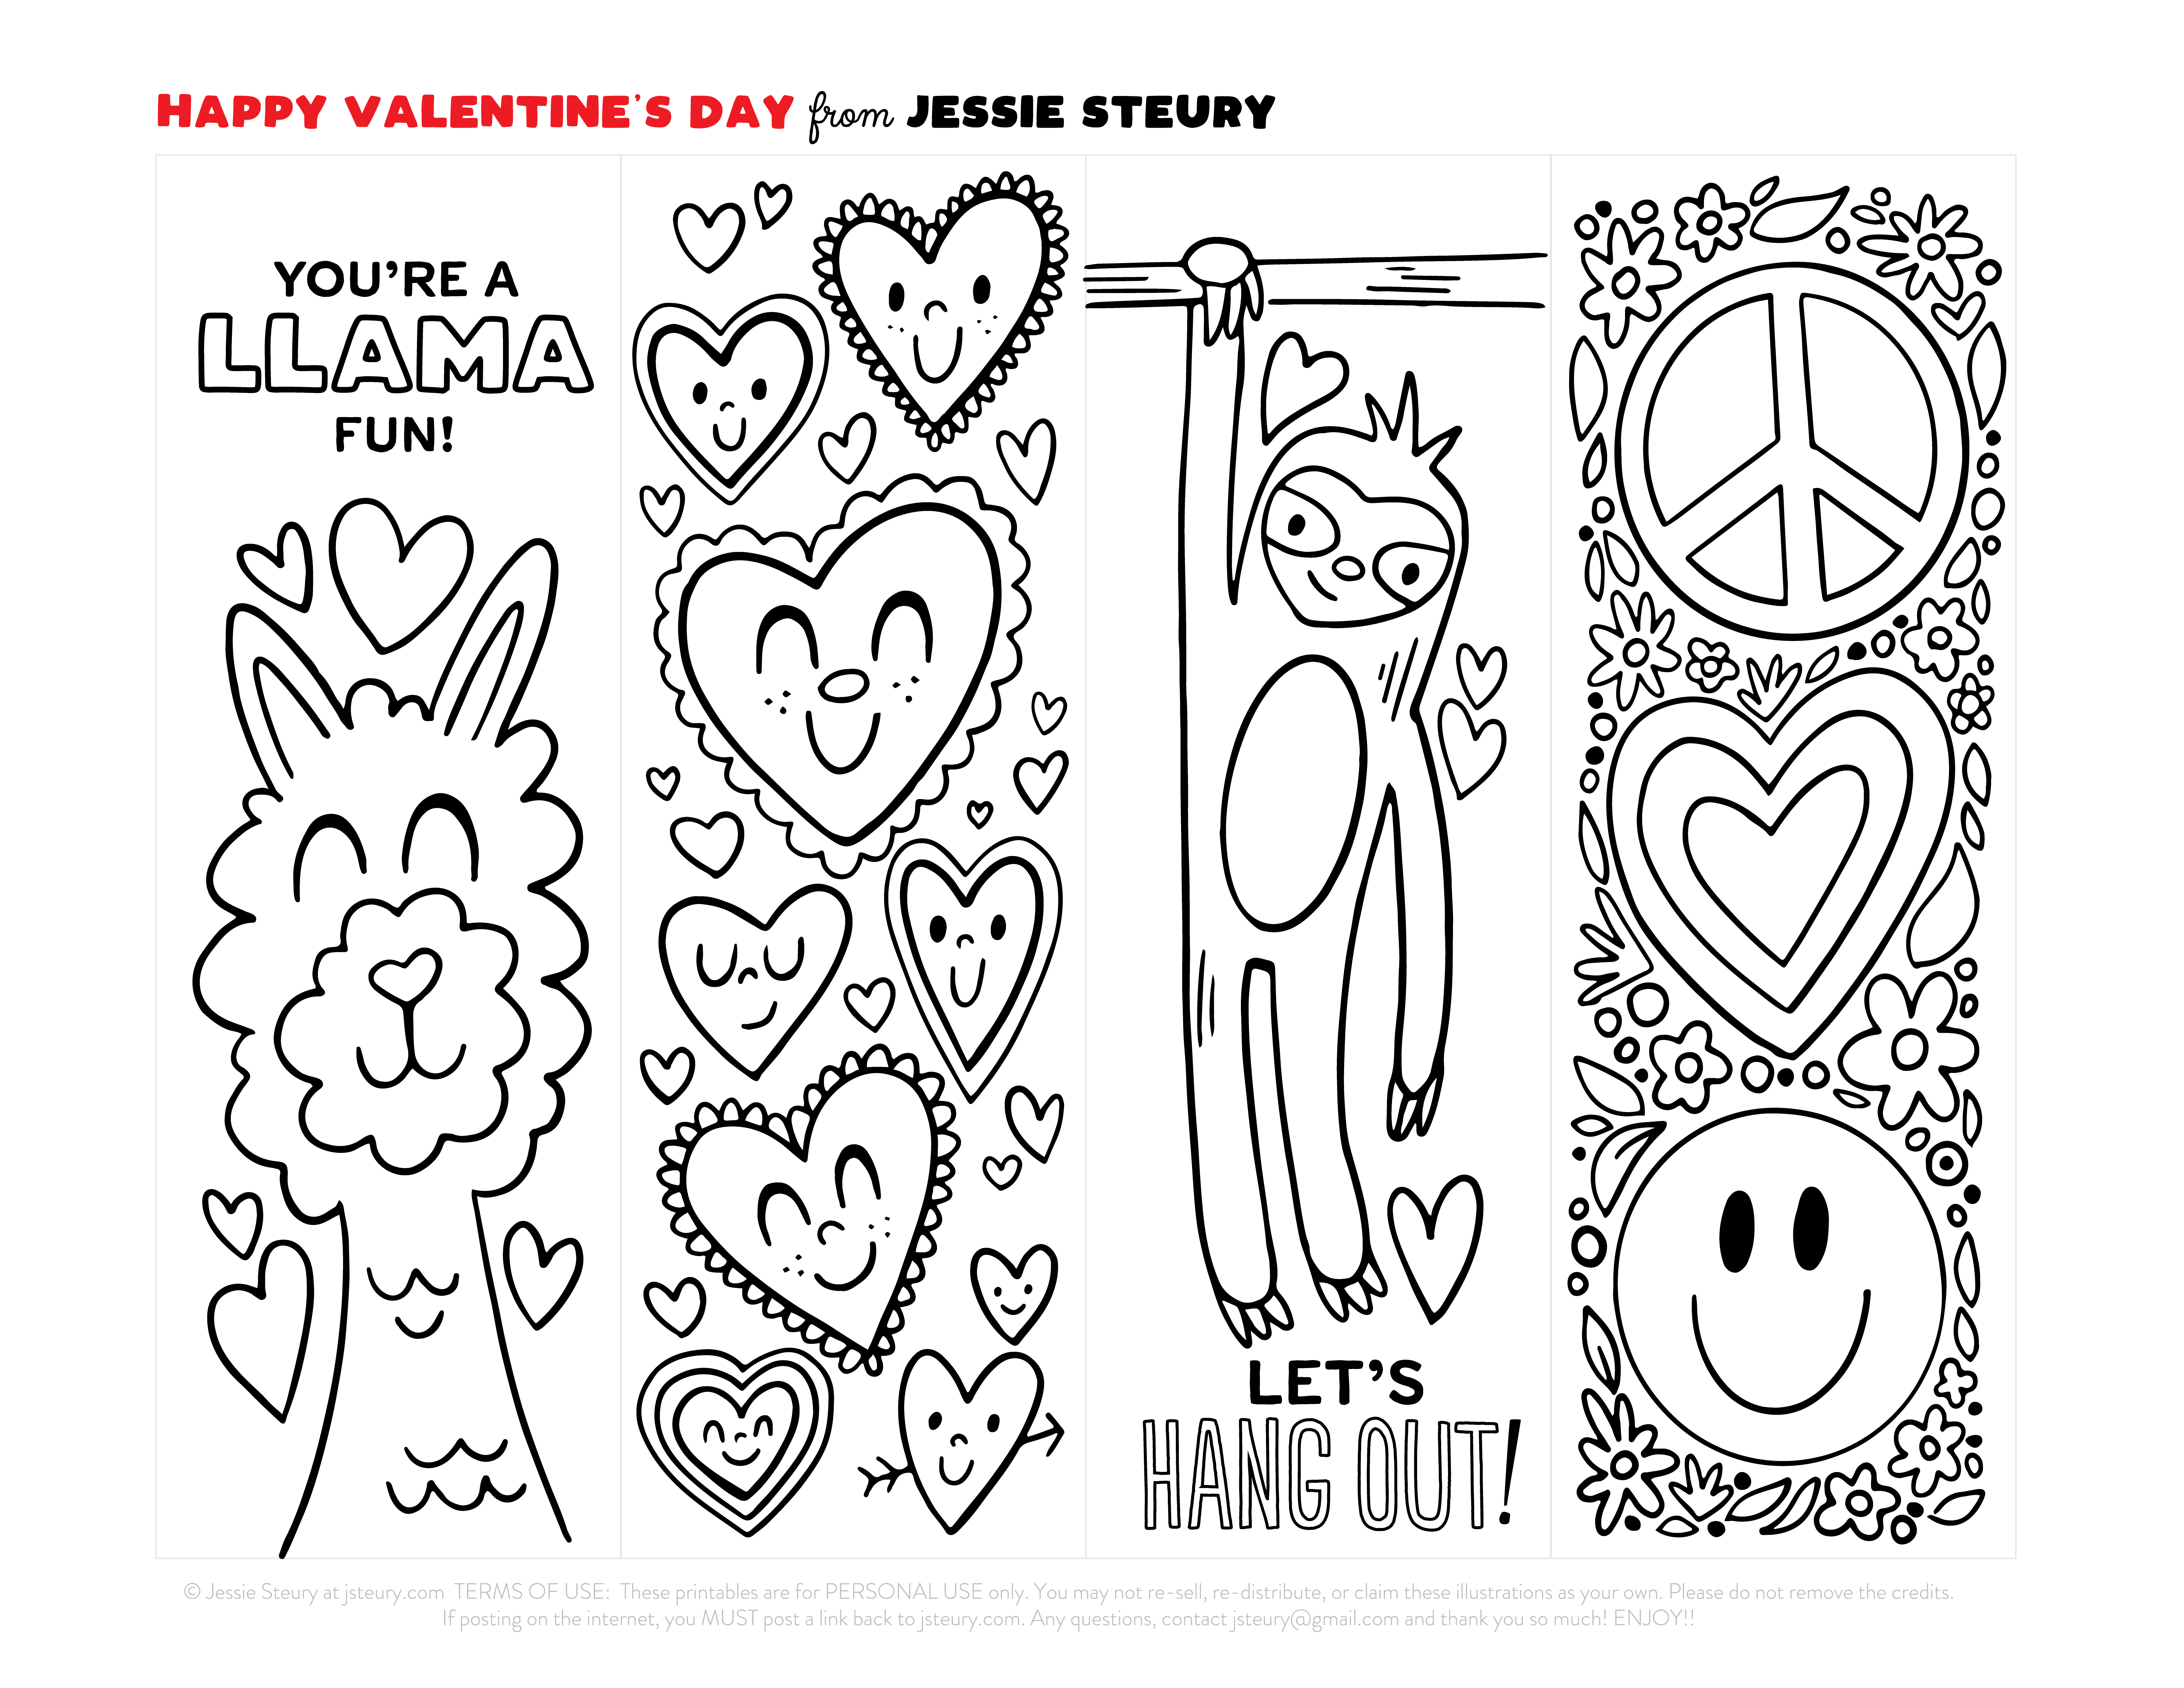 Printable Bookmark To Color - Free Printable Coloring Page Bookmarks Dawn Nicole